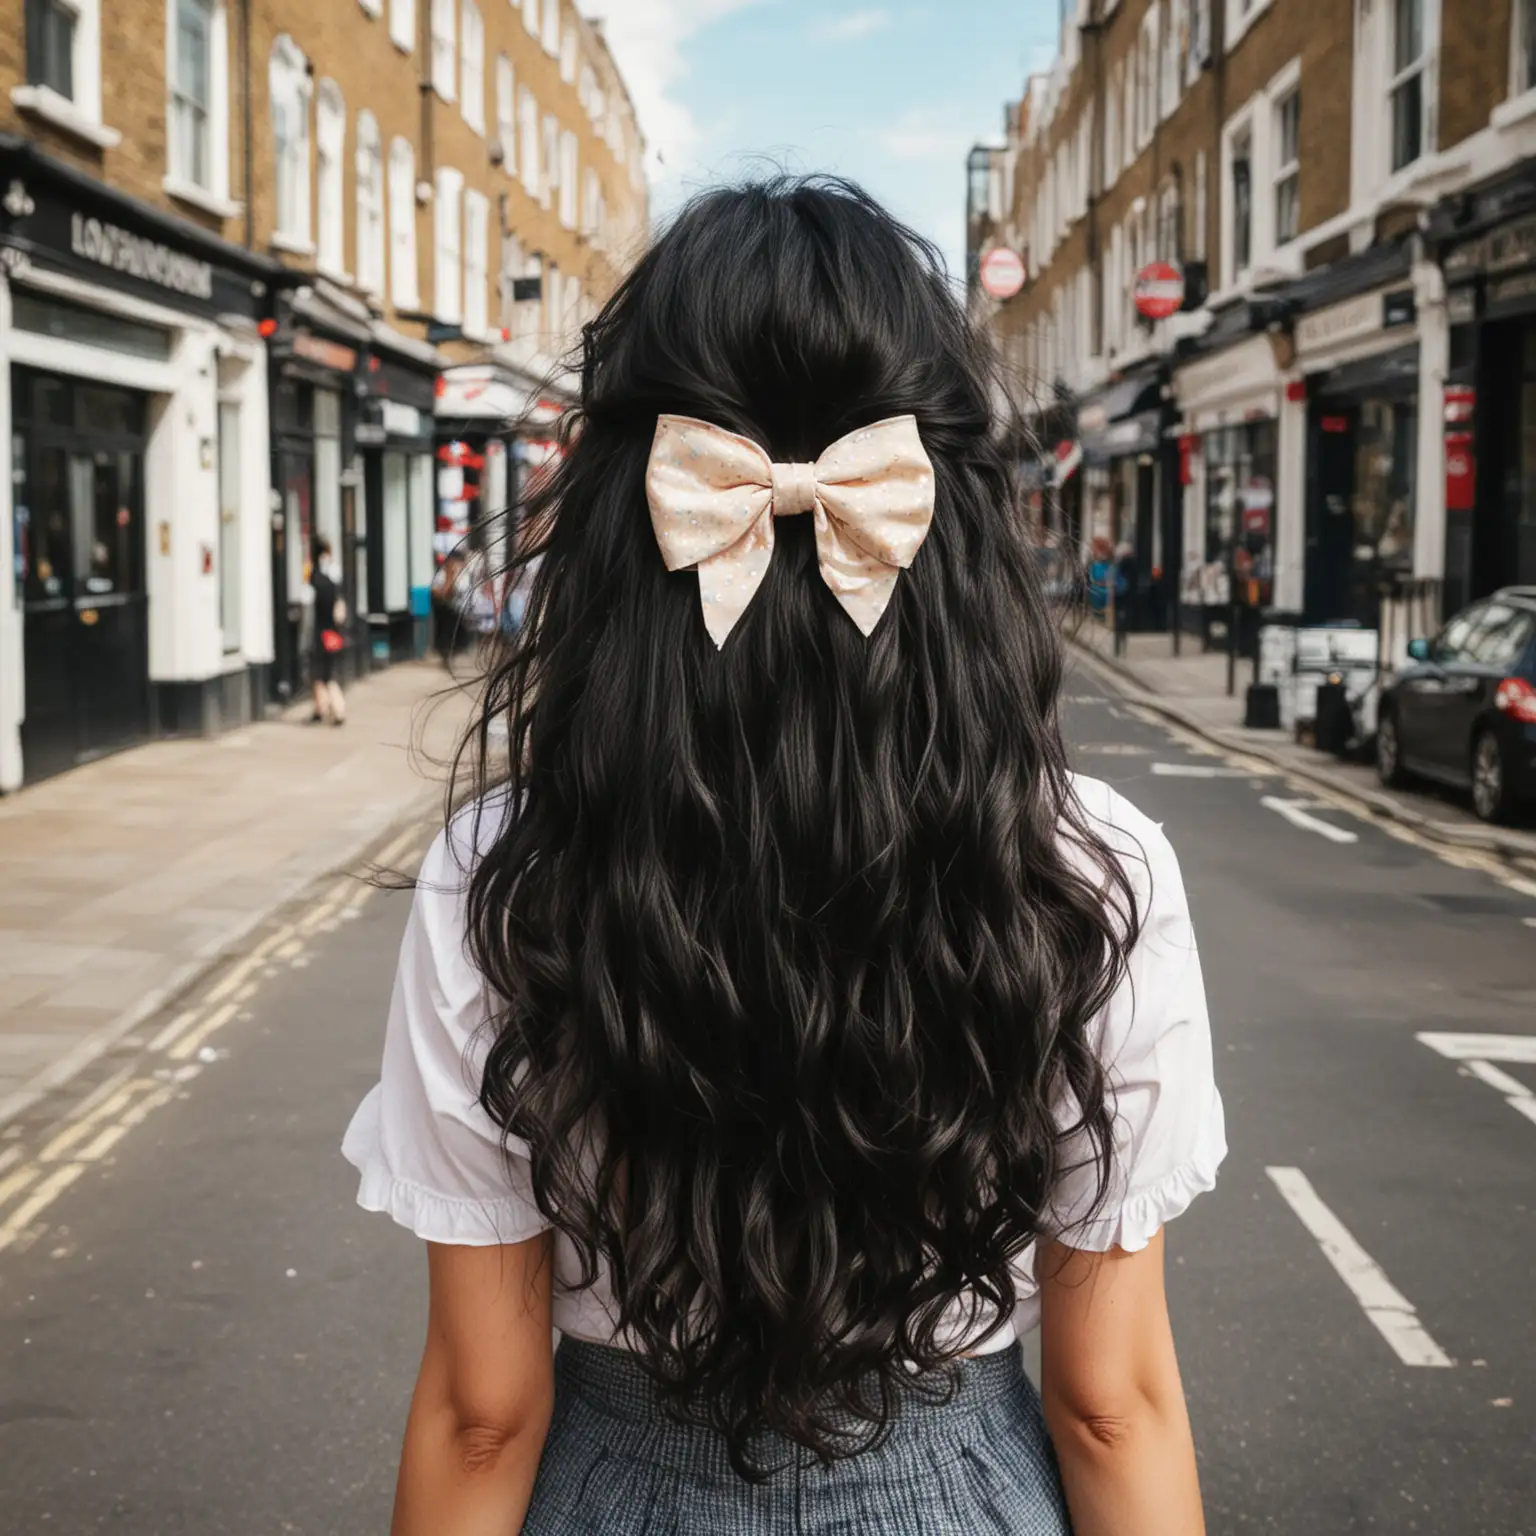 girl with long wavy black hair,bow in hair  walking away from camera on the streets of london in the summer, we cant see her face